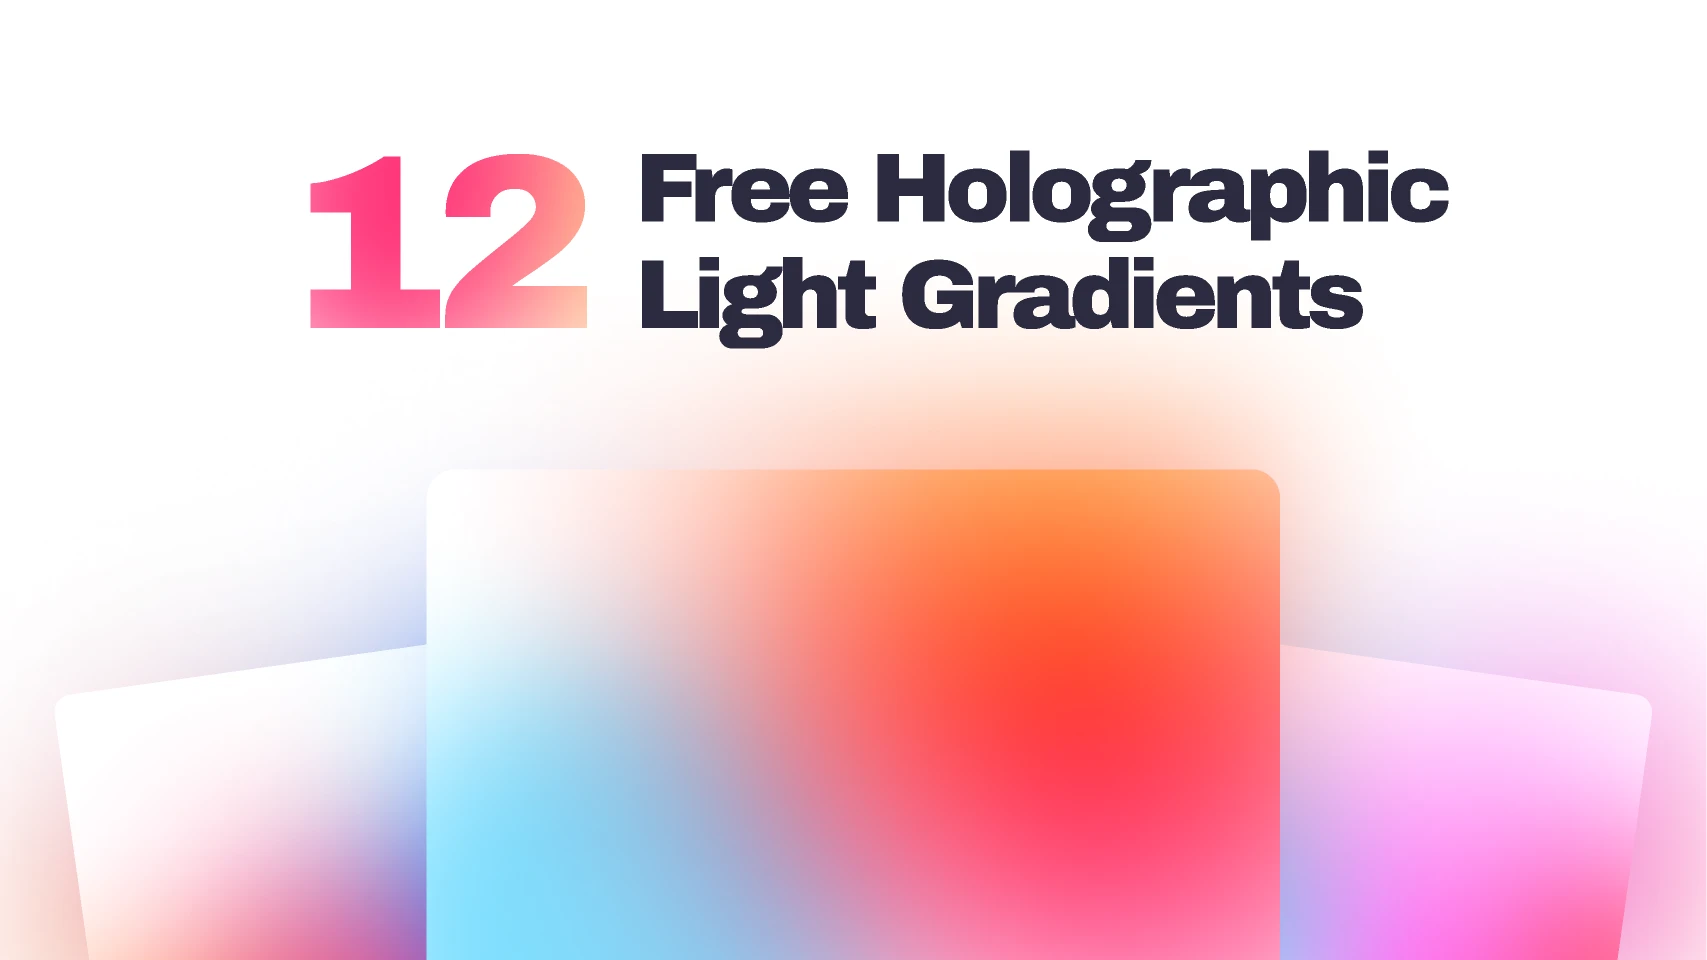 12 Free Holographic Light Gradients 1.0 for Figma and Adobe XD